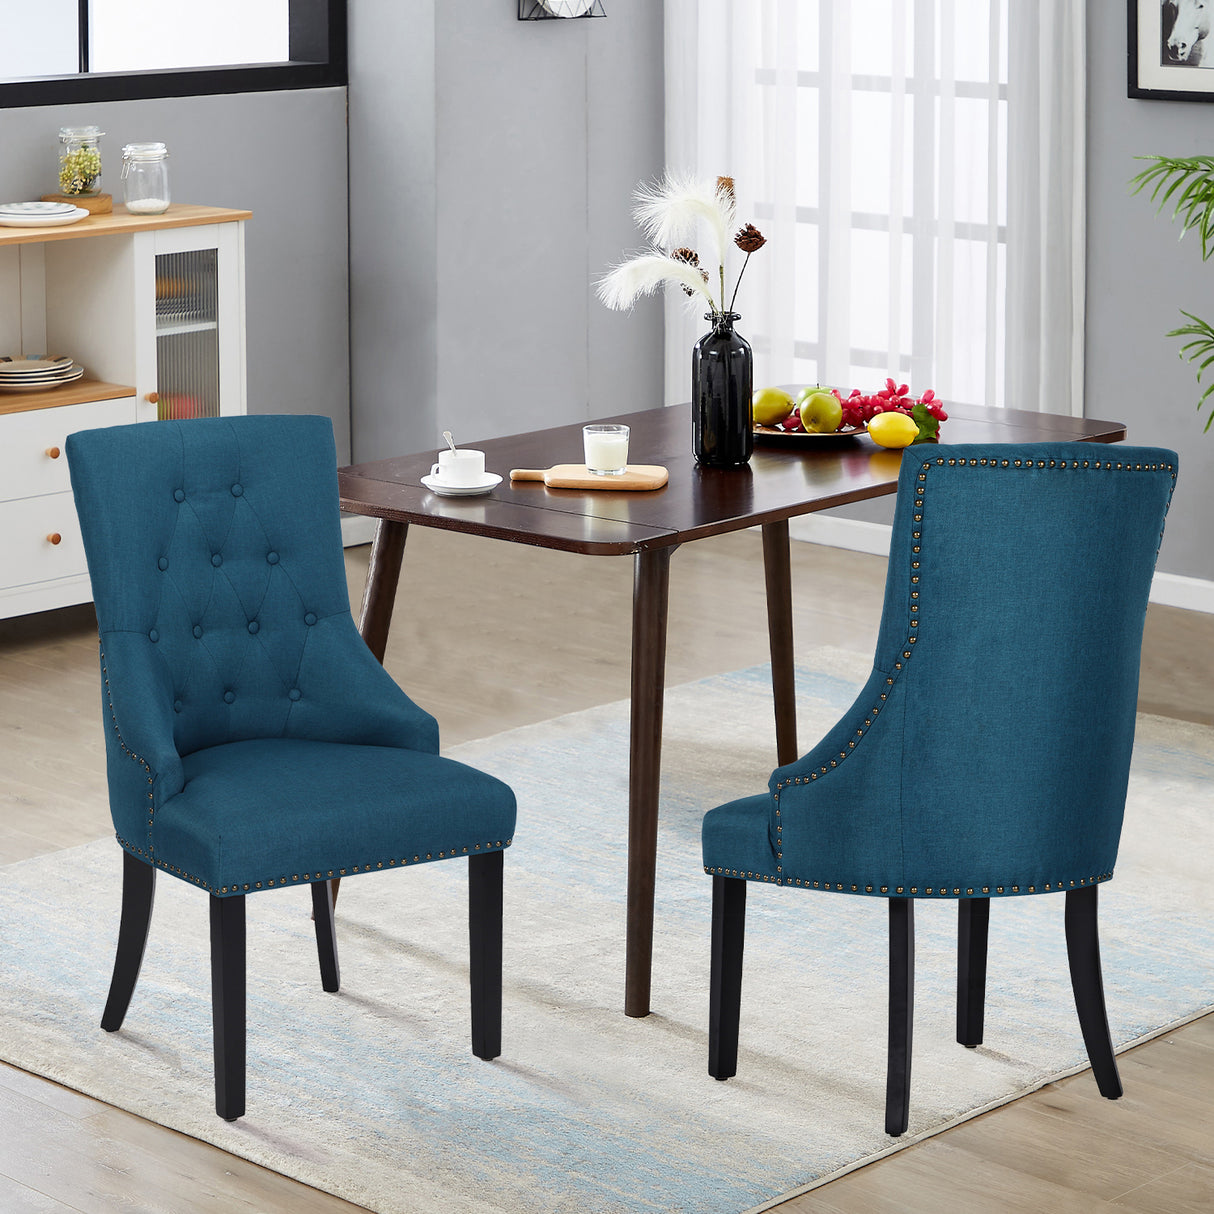 Vanbow.Linen simple and fashionable wooden chair leg single-back chair, rivet reinforcement is applicable to bedroom, living room and office (Blue+Linen)Double bags